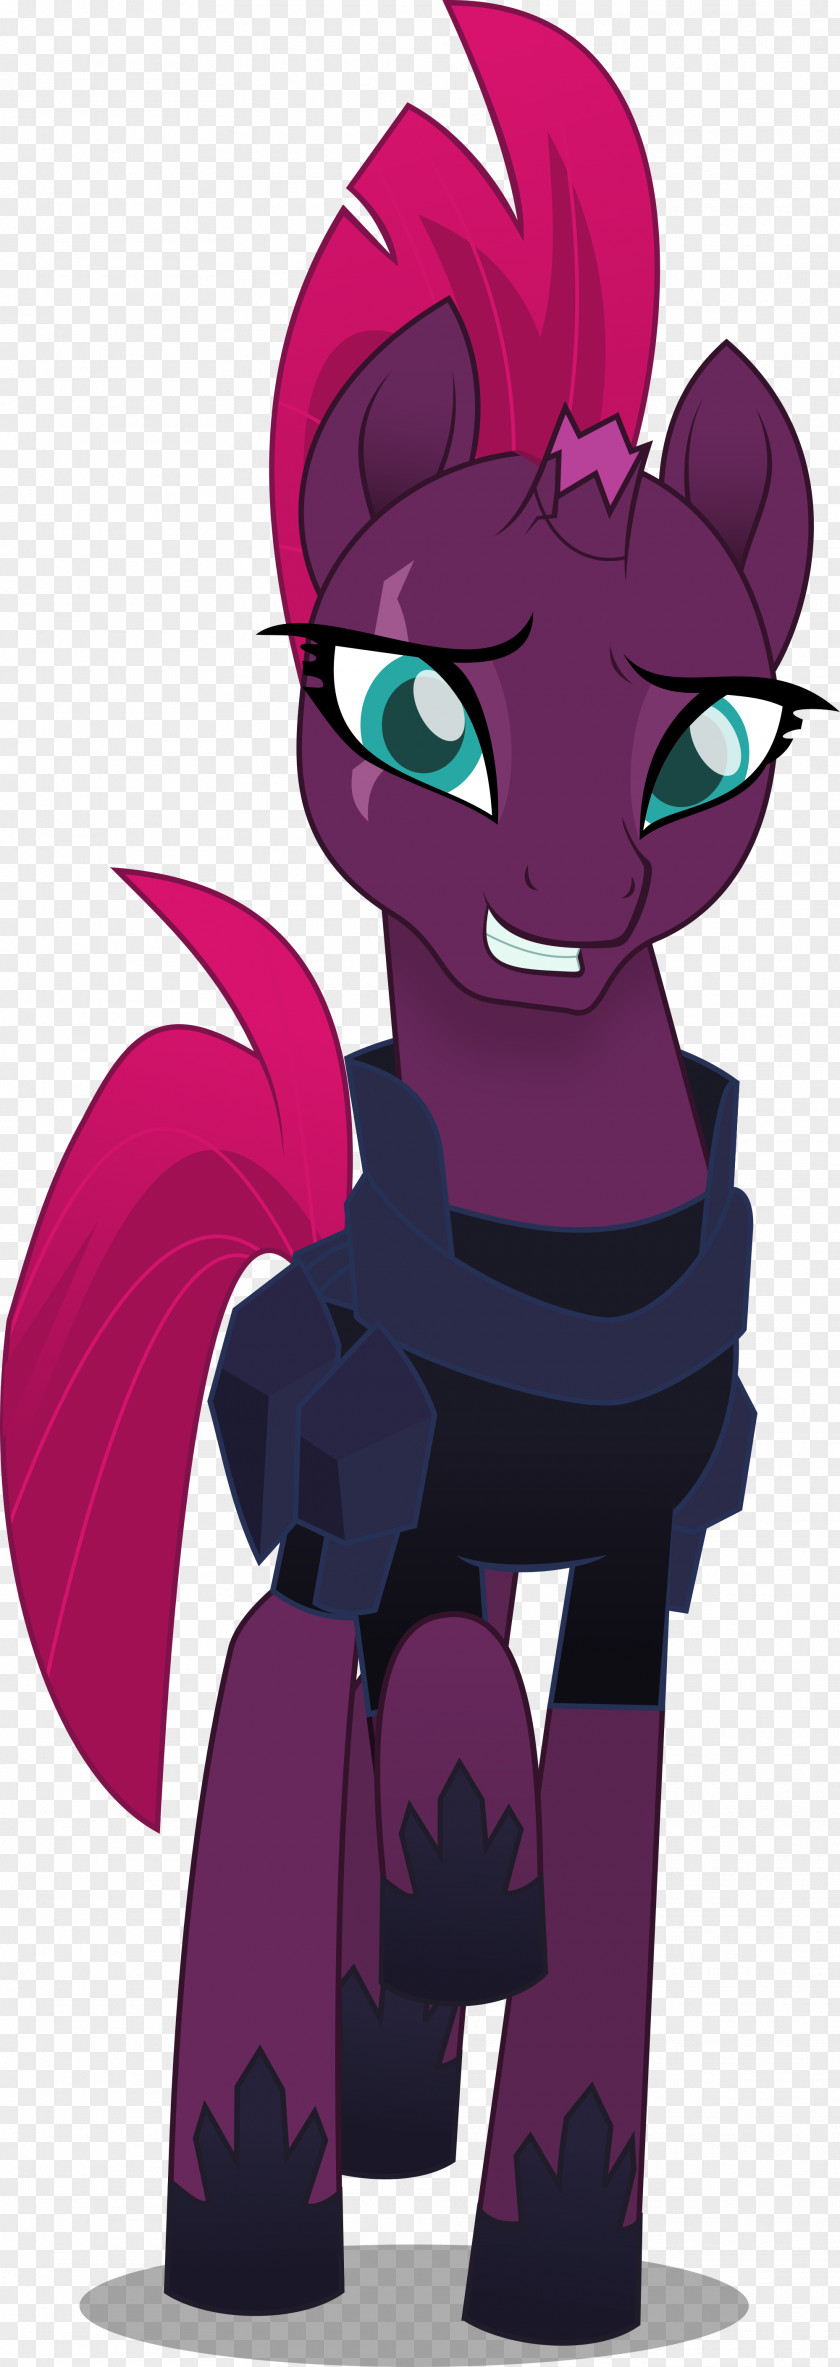 Tempest Shadow Rarity The Storm King Pony Sunset Shimmer PNG